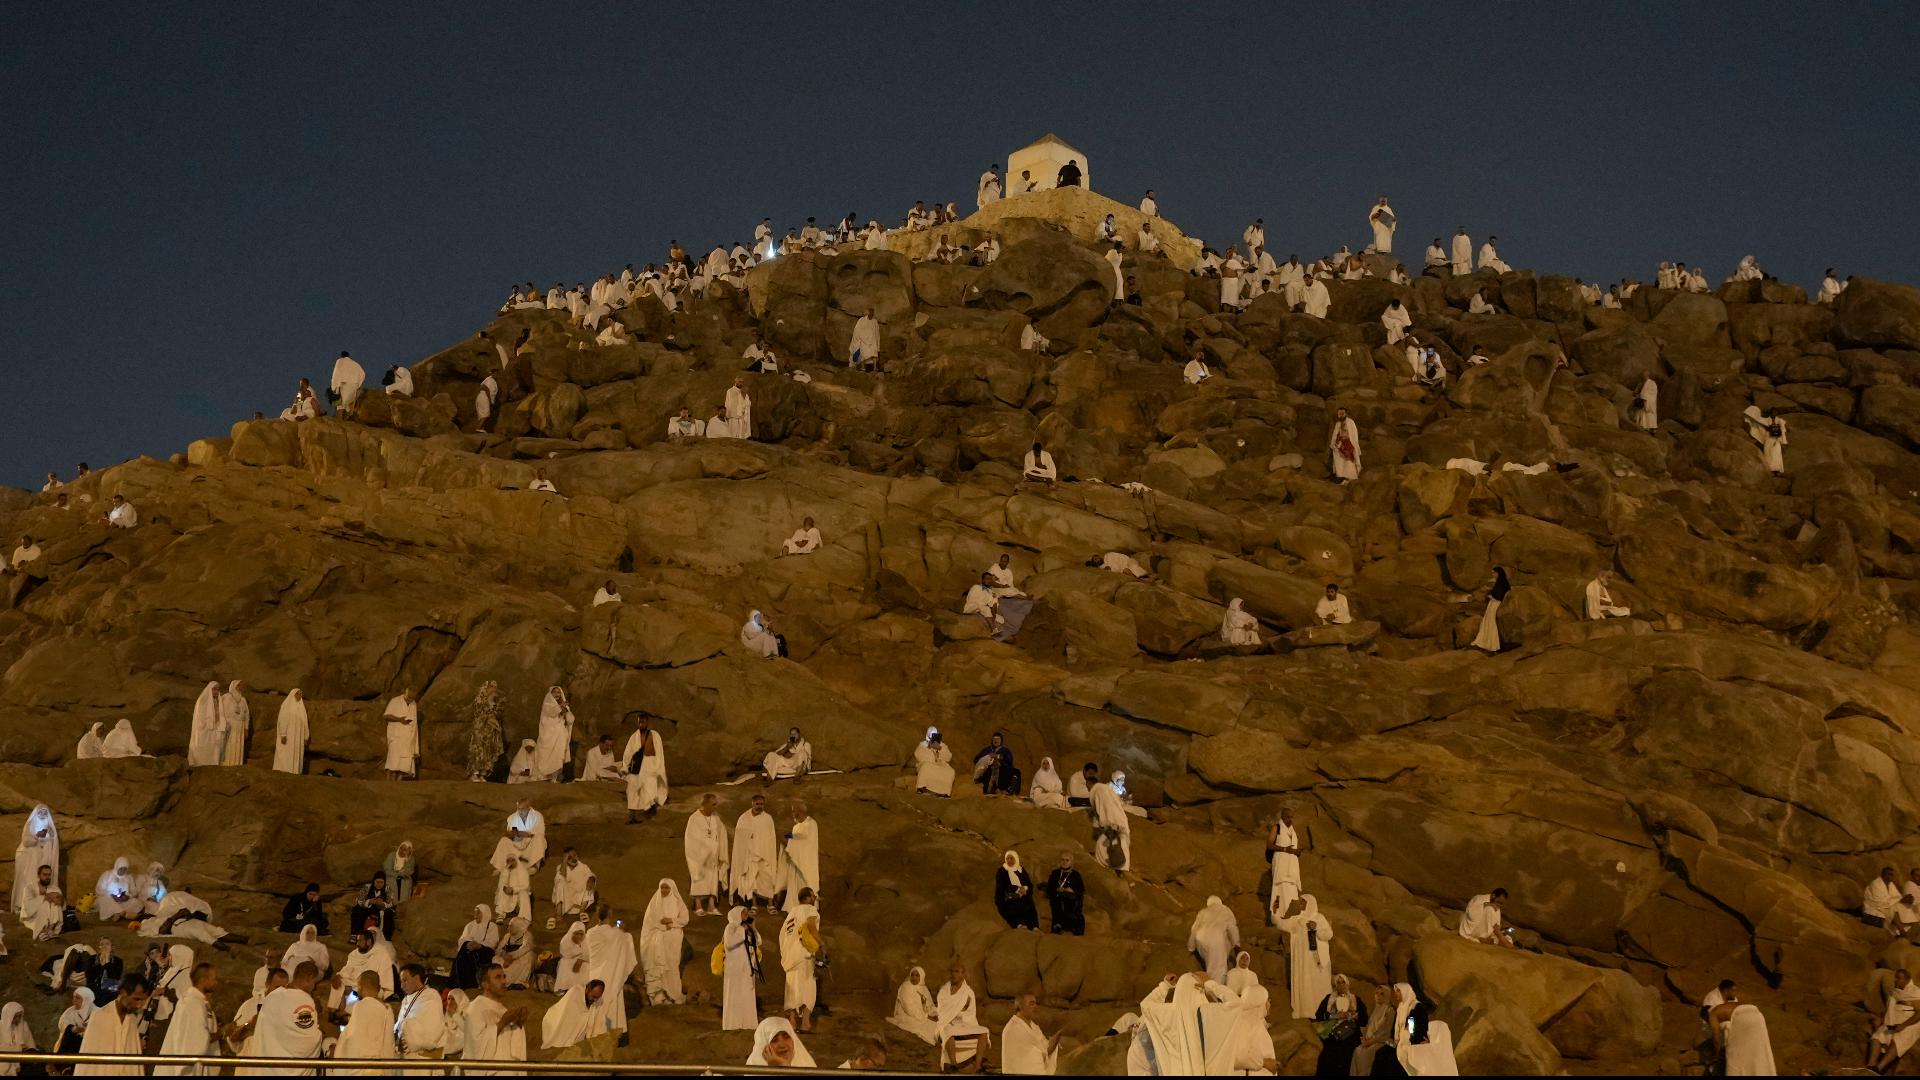 The ritual marks the final days of the Hajj, or Islamic pilgrimage, and the start of the Eid al-Adha celebrations for Muslims around the world.